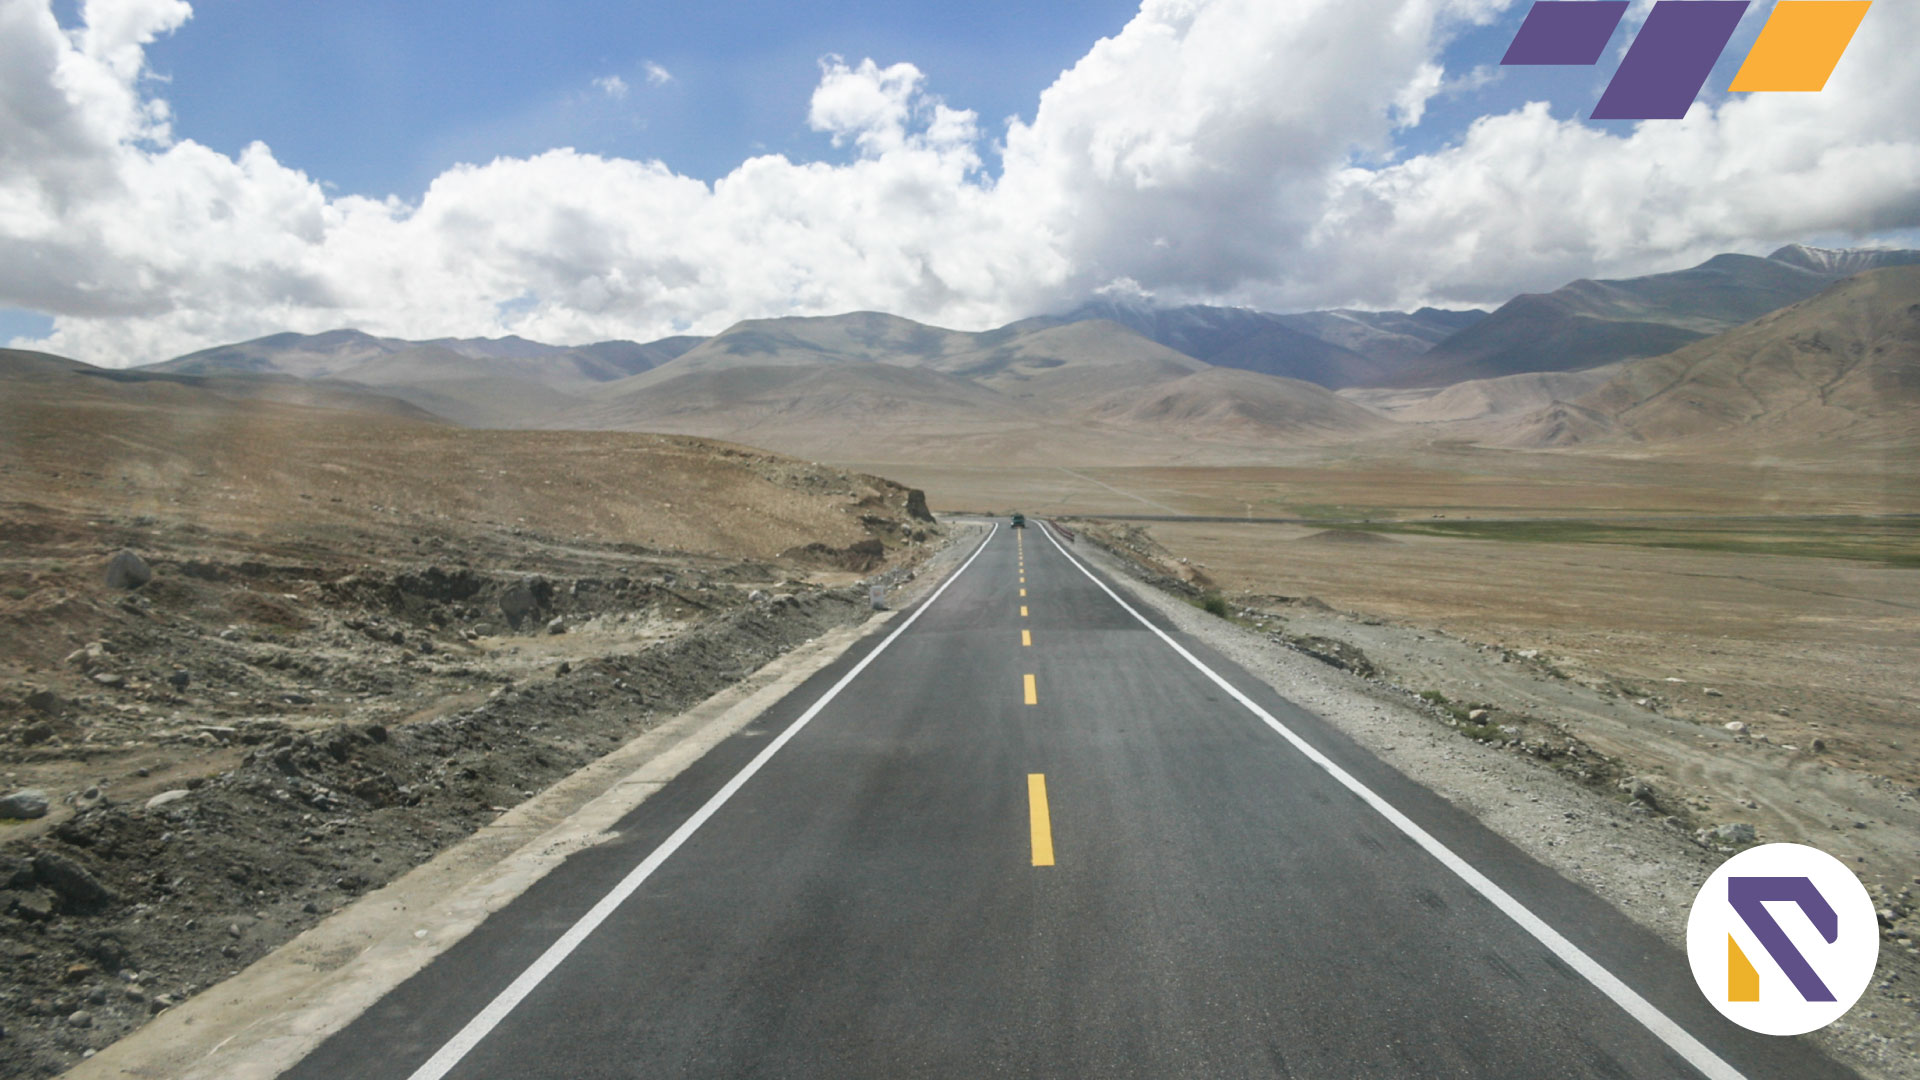 The Federal Ministry inaugurated project worth 292 million rupees to revamp Karakorum Highway (KKH)